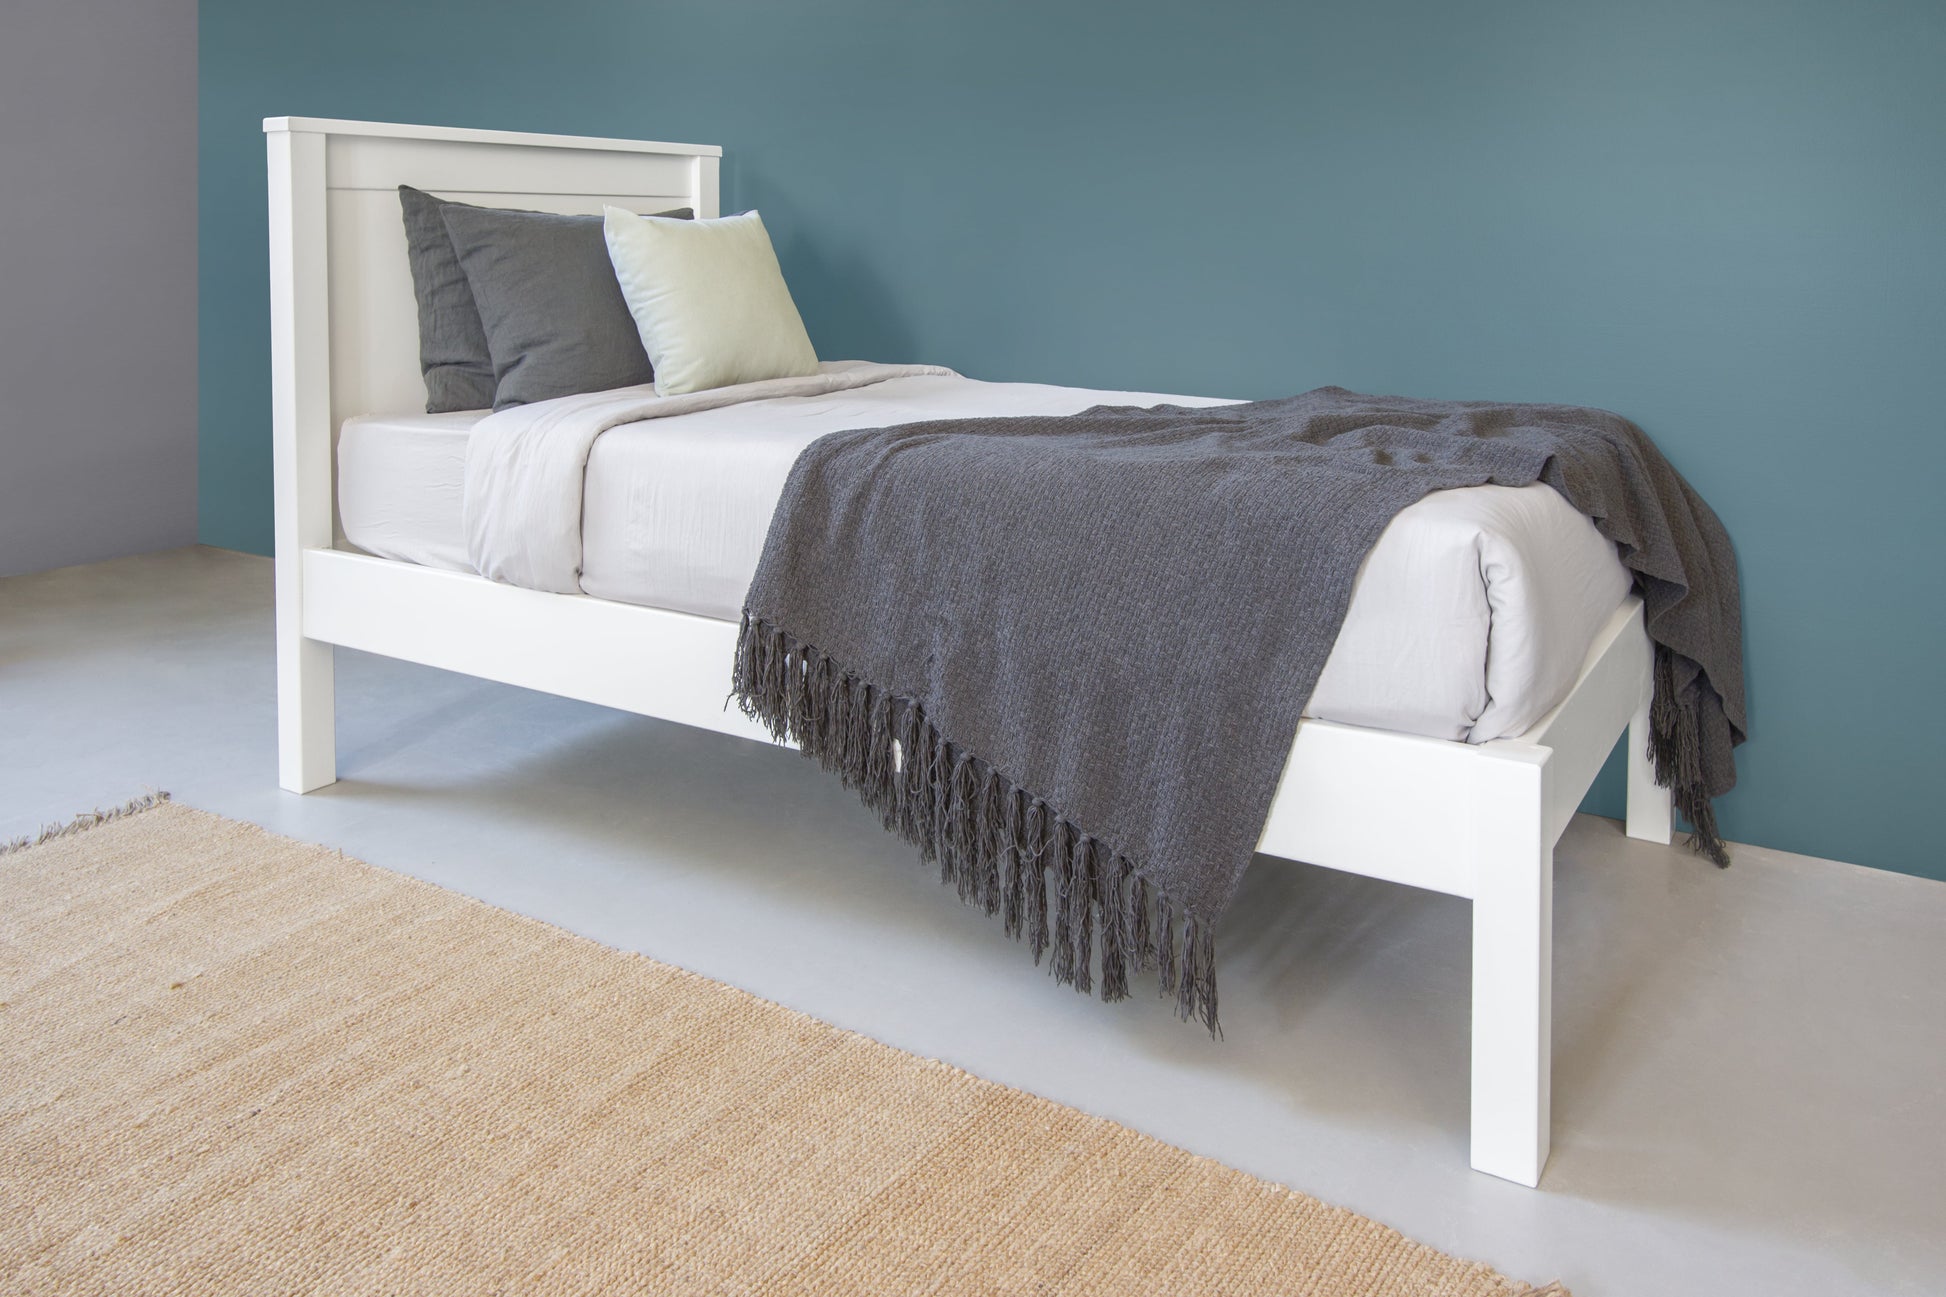 Axis classic bed - The Room